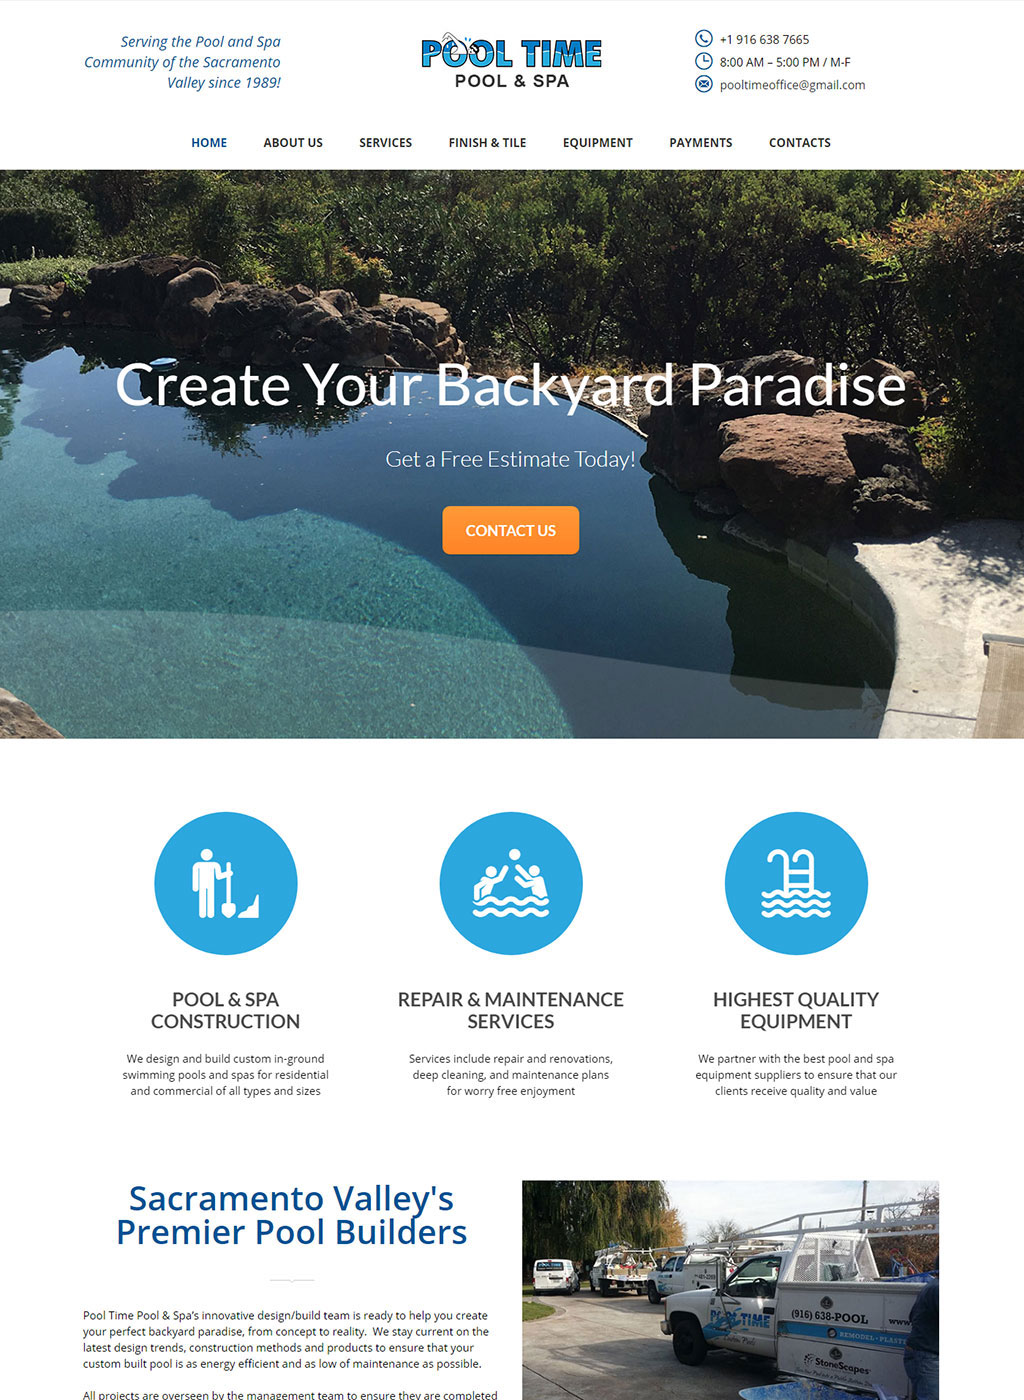 Website developed for Sacramento pool and spa construction business